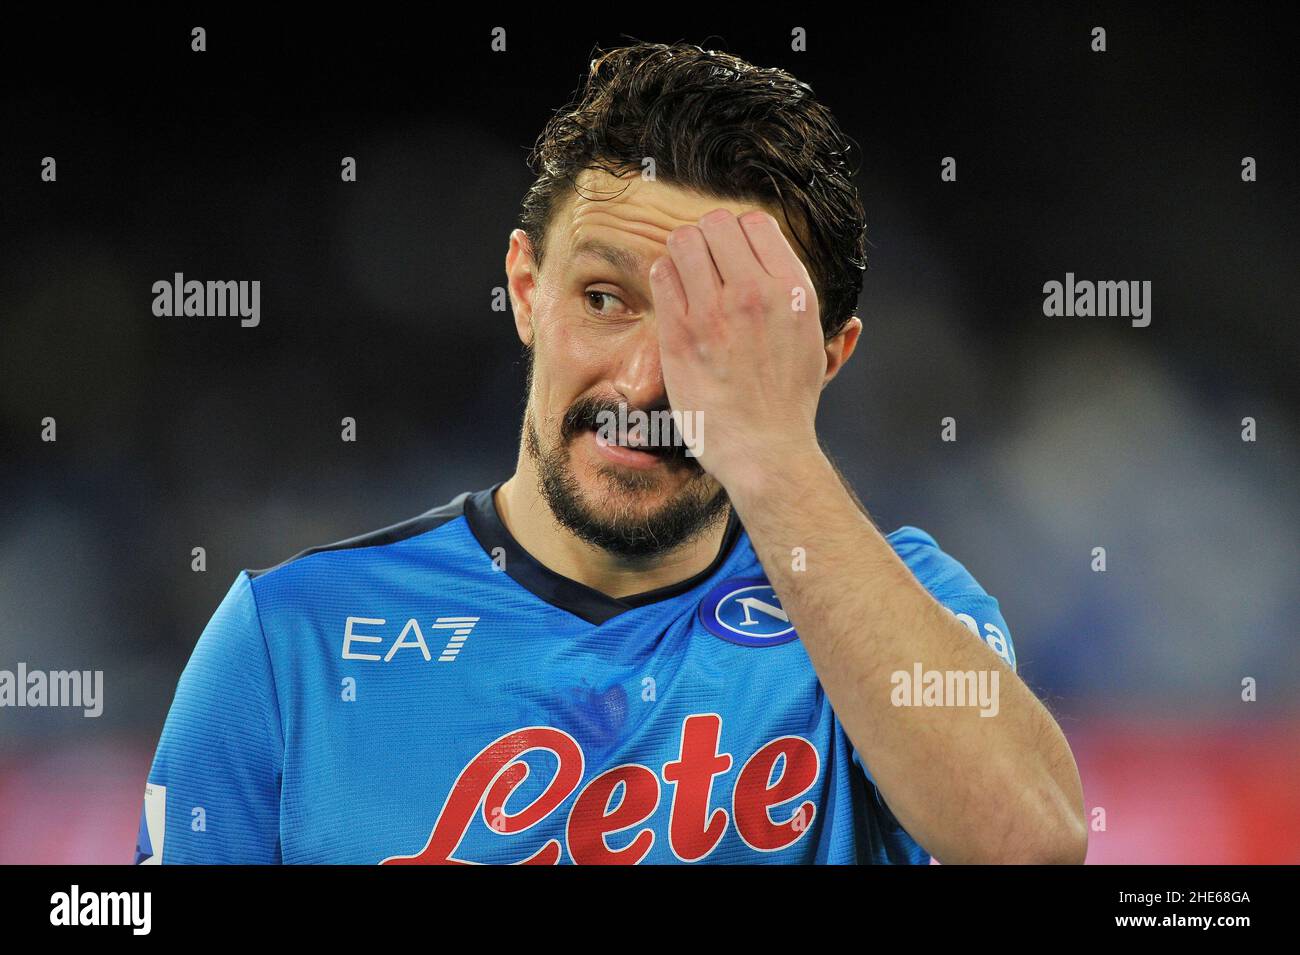 Mario Rui player of Napoli, during the match of the Italian Serie A championship between Napoli vs Empoli final result Napoli 0, Empoli 1,match played Stock Photo